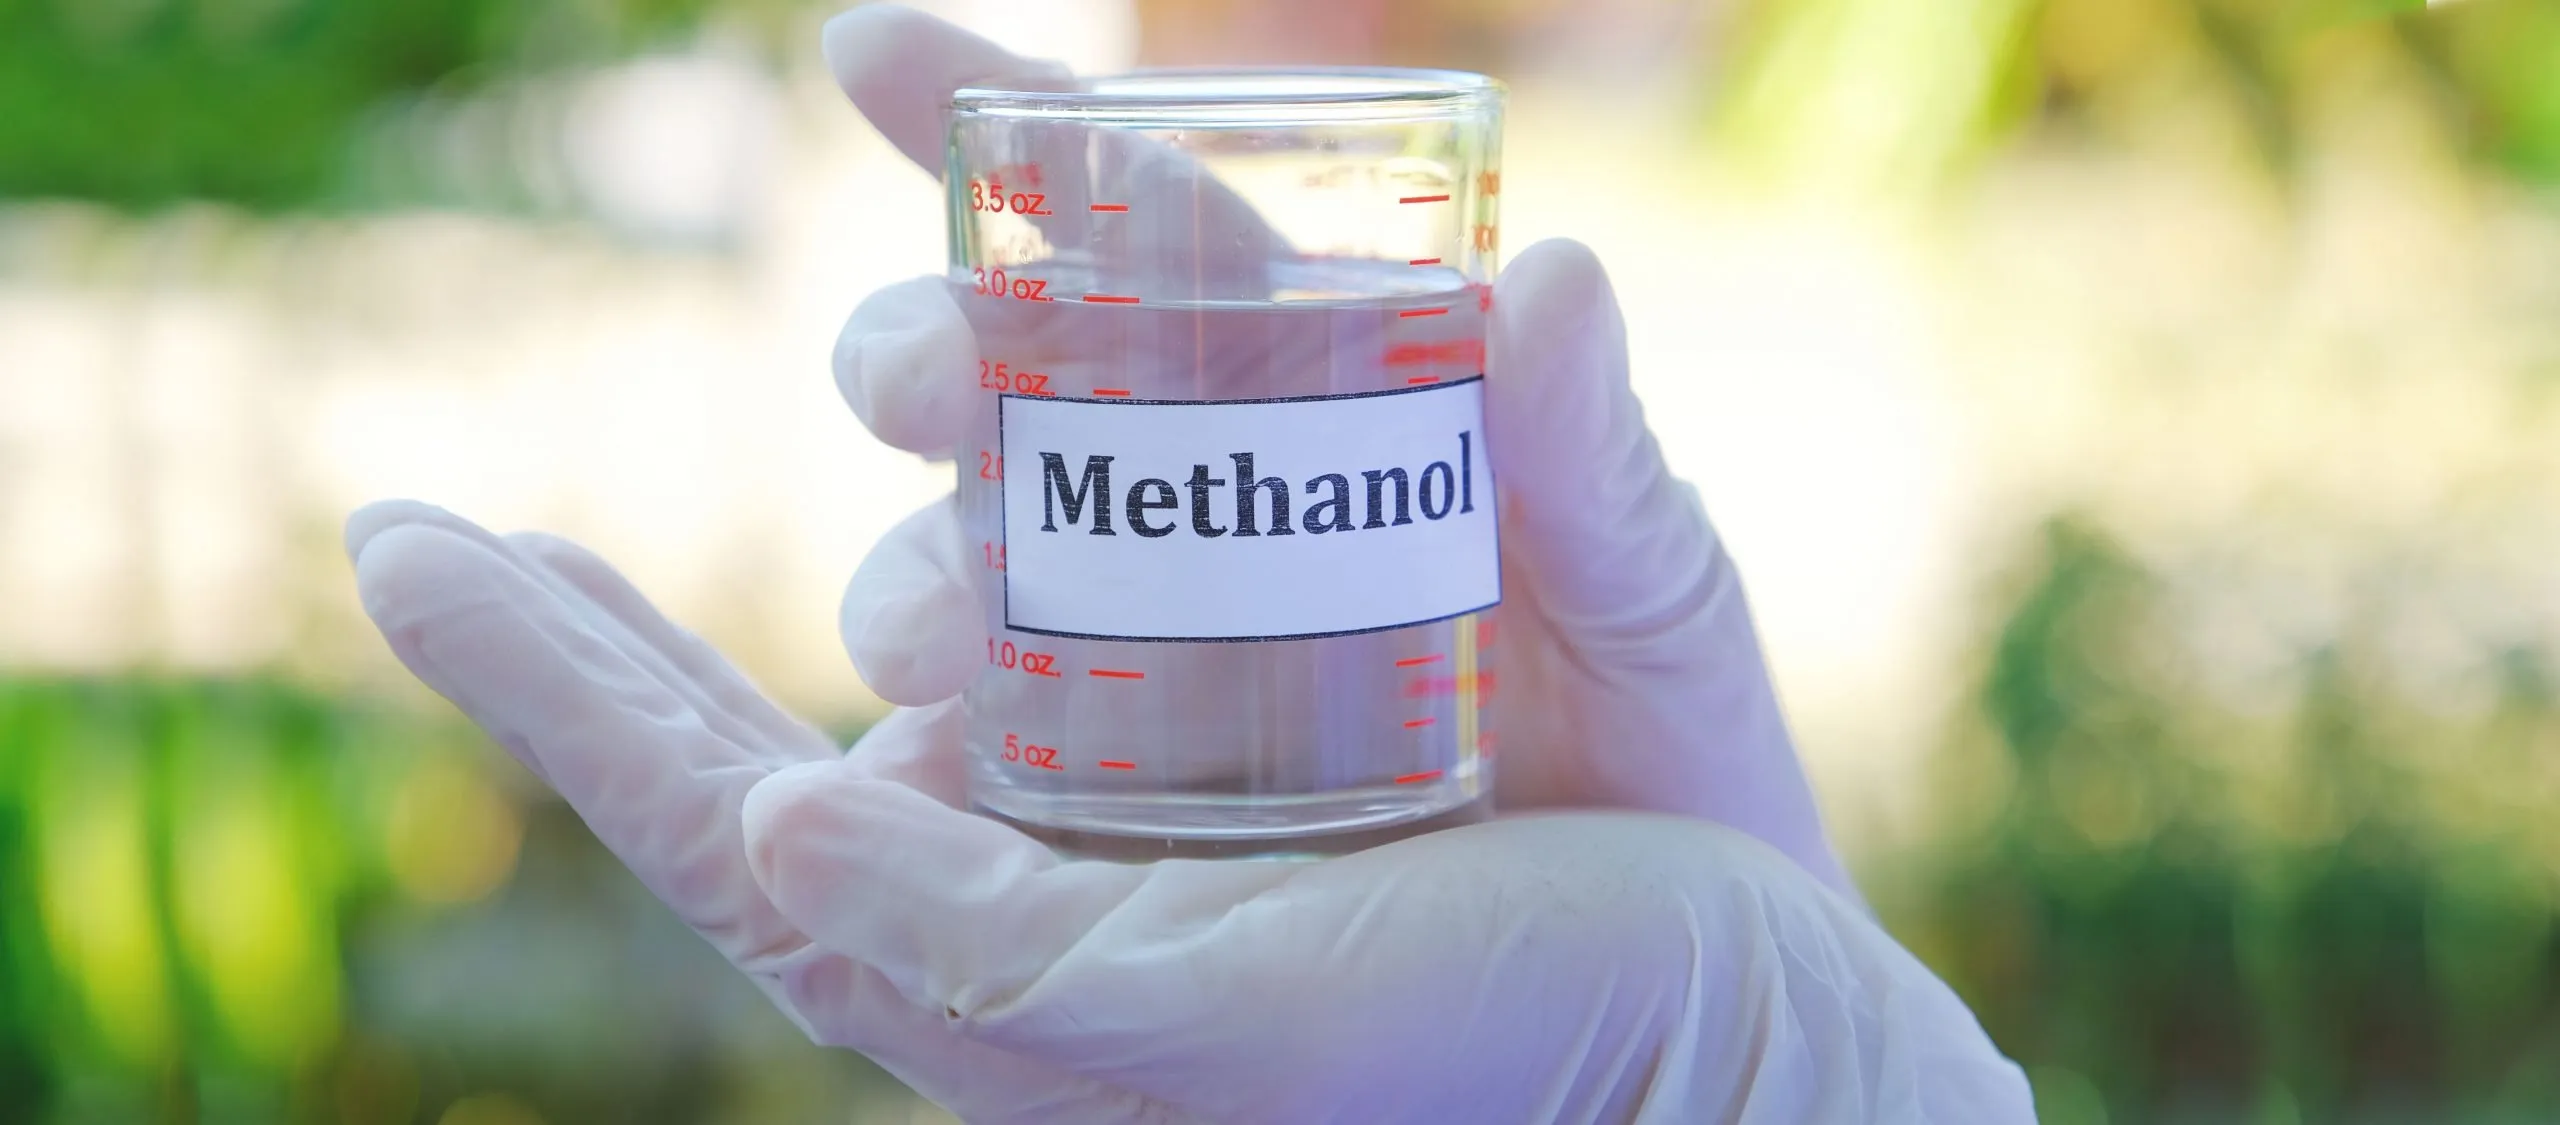 What is Methanol